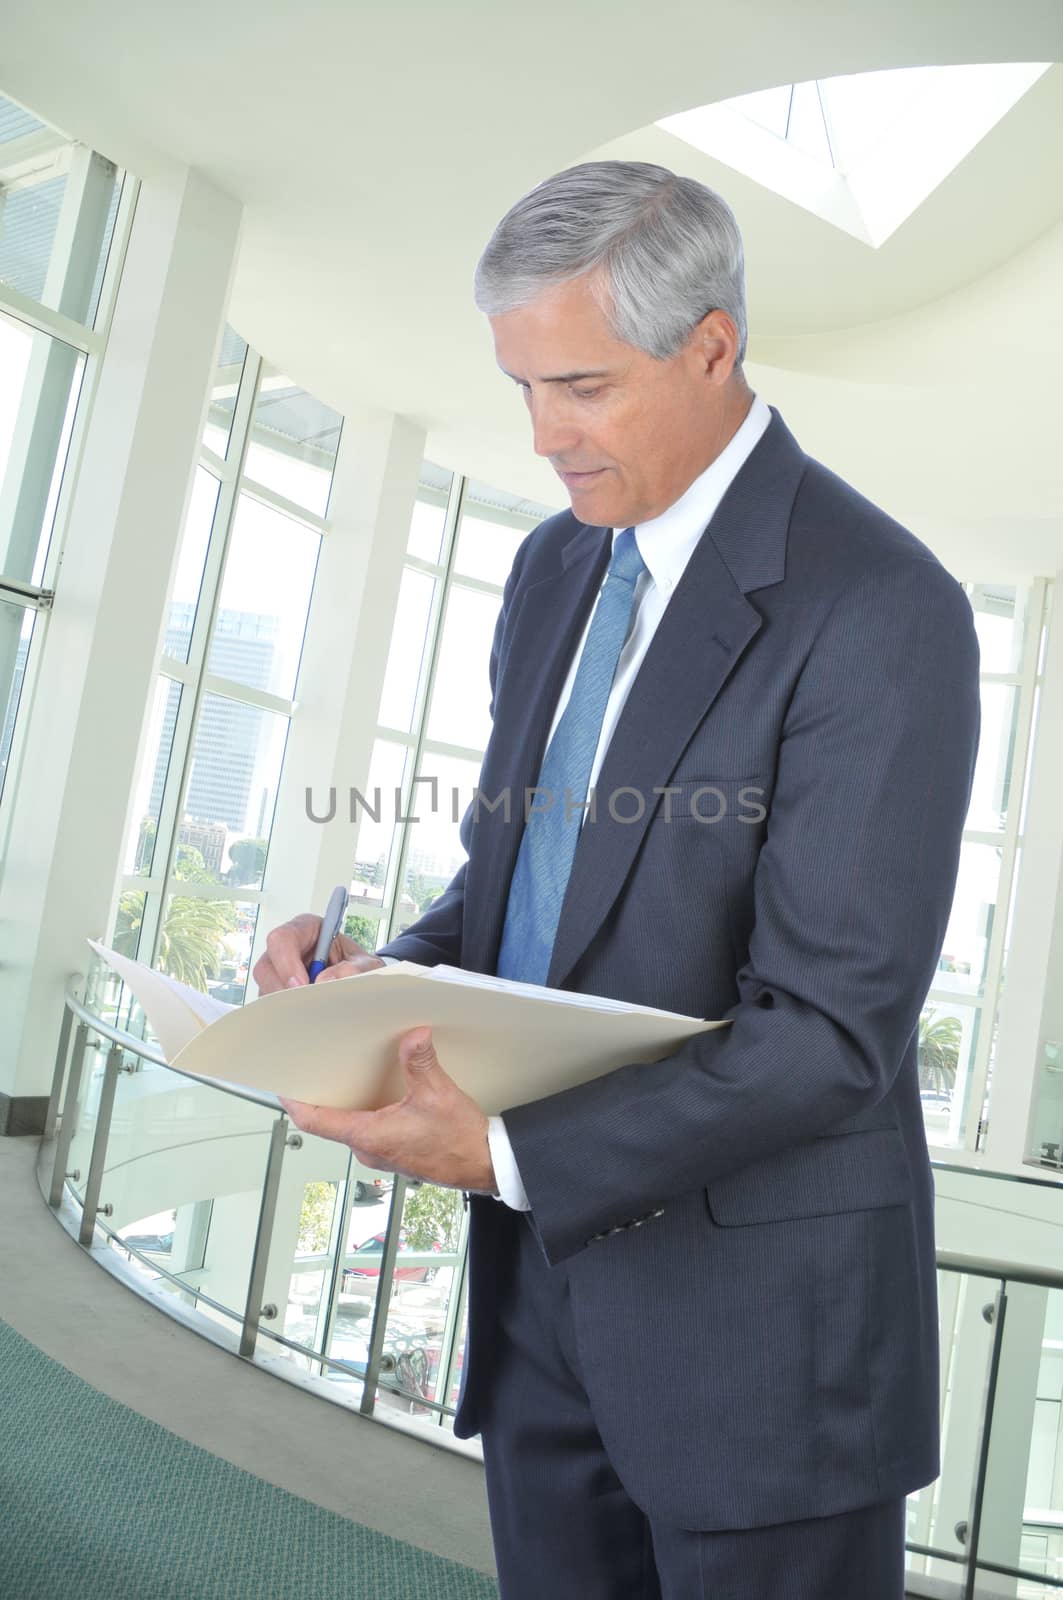 Standing Middle aged Businessman Writing in File Folder in Office Setting